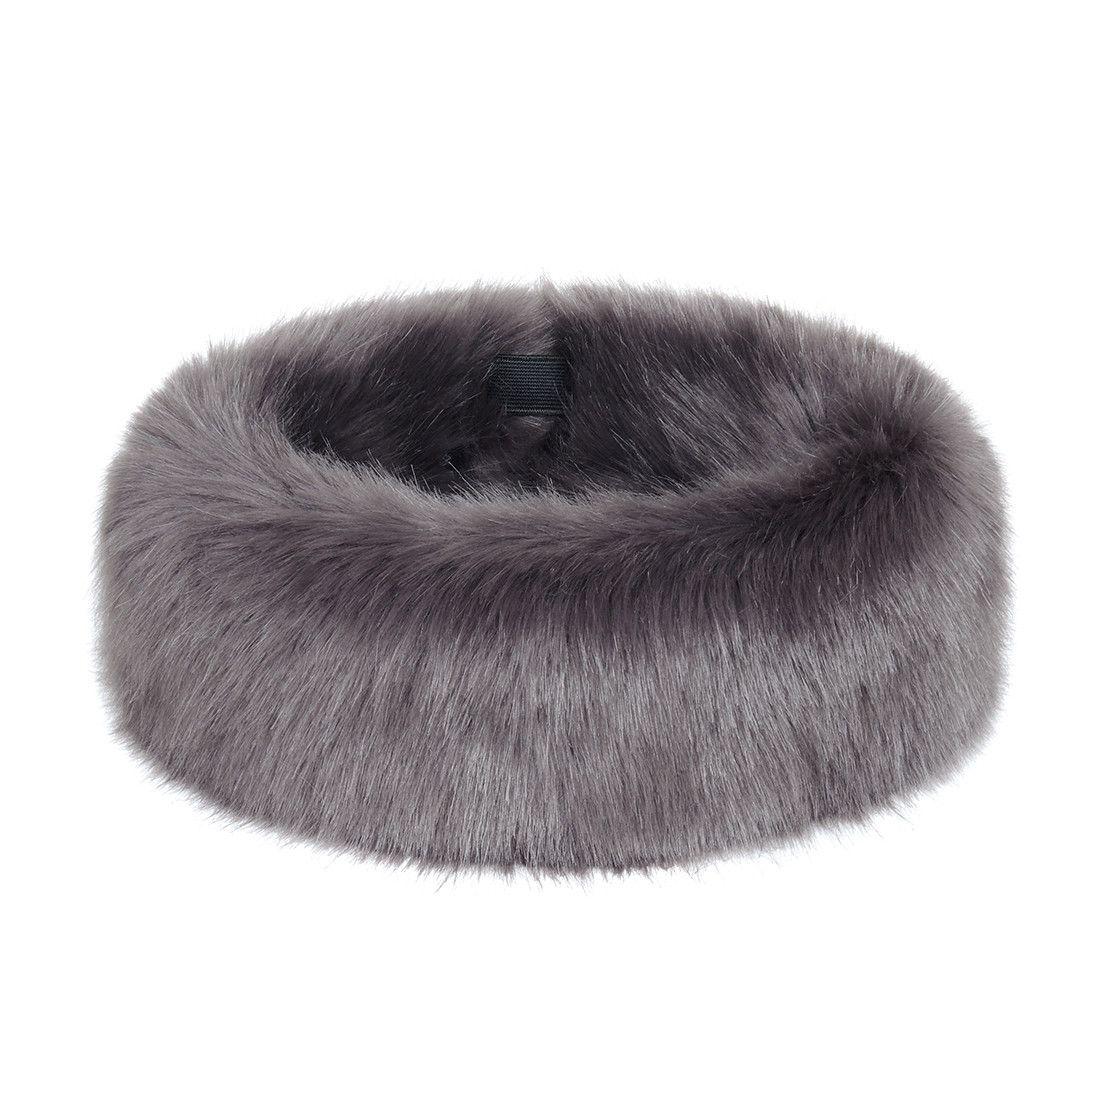 Huff Black and White Logo - Steel Faux Fur Huff